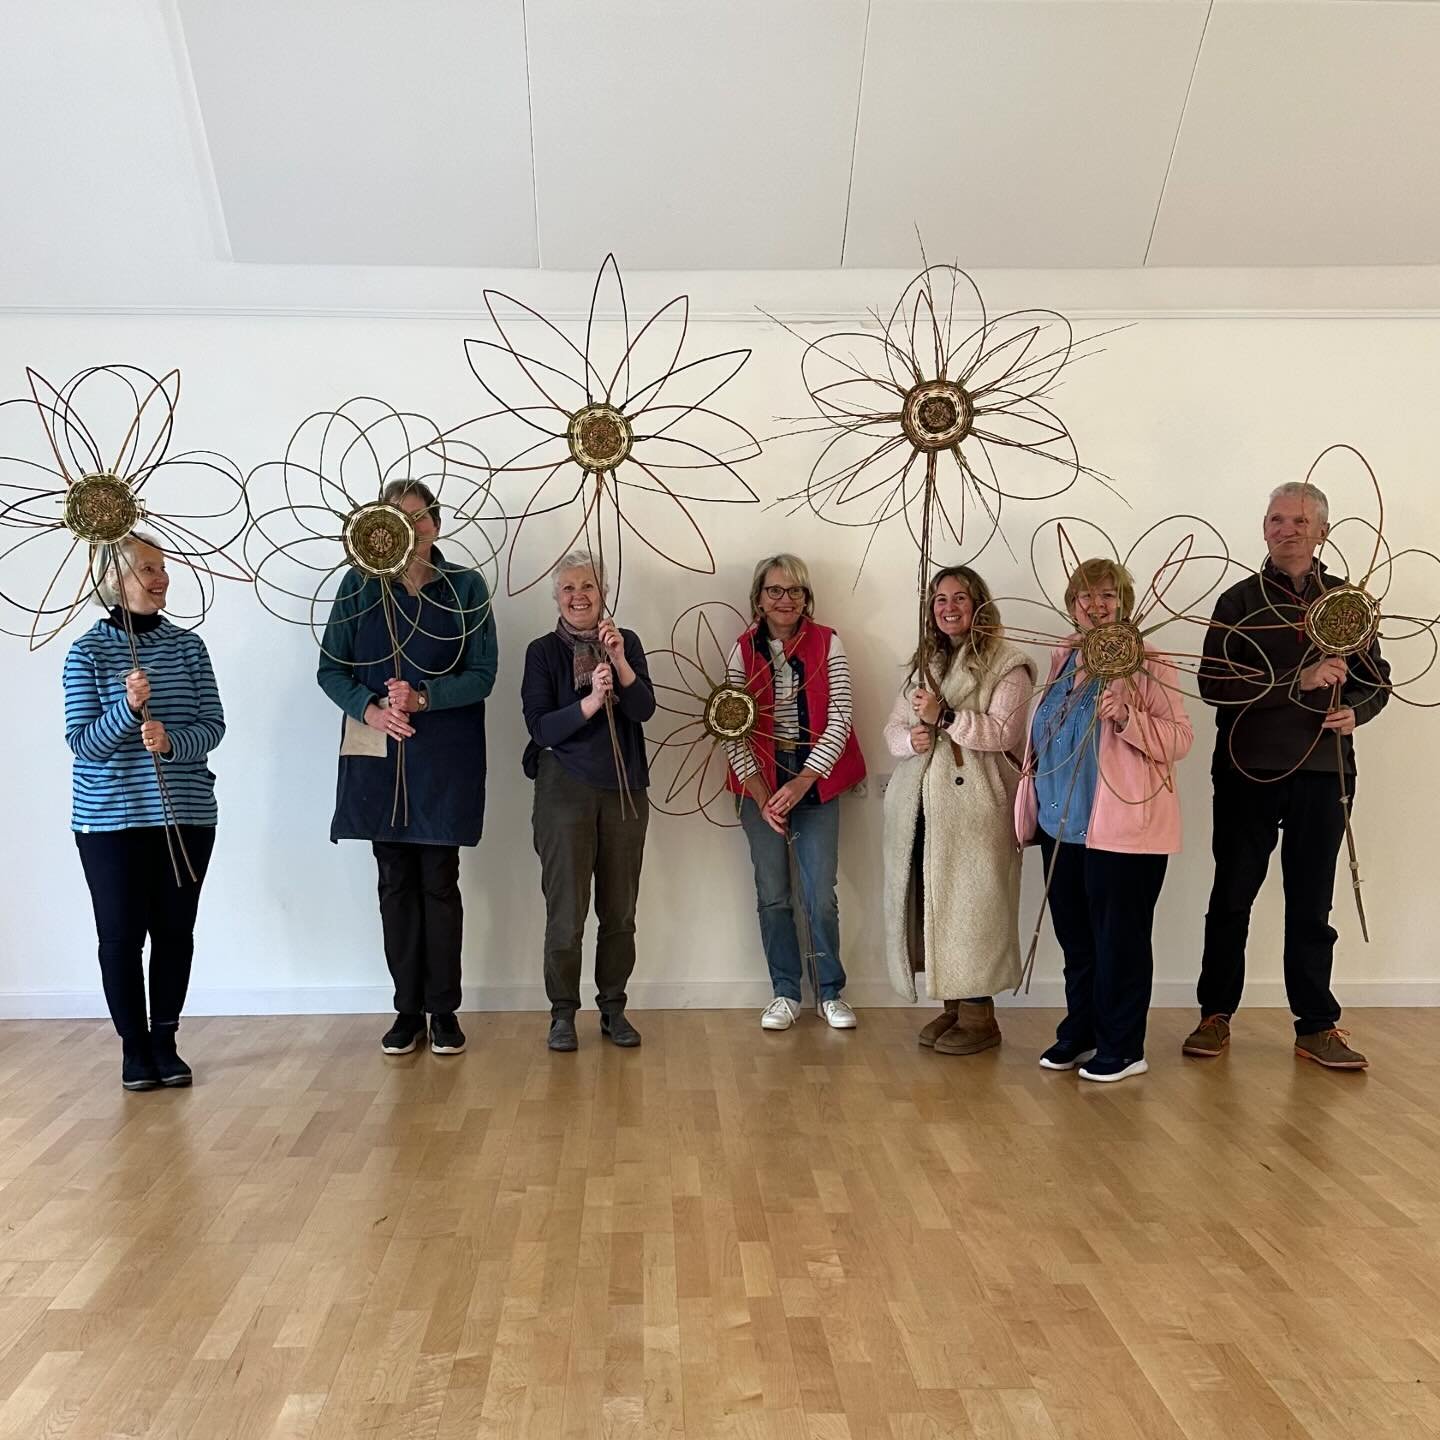 Such a lovely cheerful and very creative bunch @wrenhallwroxhall making giant, colourful willow flowers today. Thanks to Denise for organising and providing the delicious cake. Looking forward to visiting again on Friday for more willowy fun! 

#will